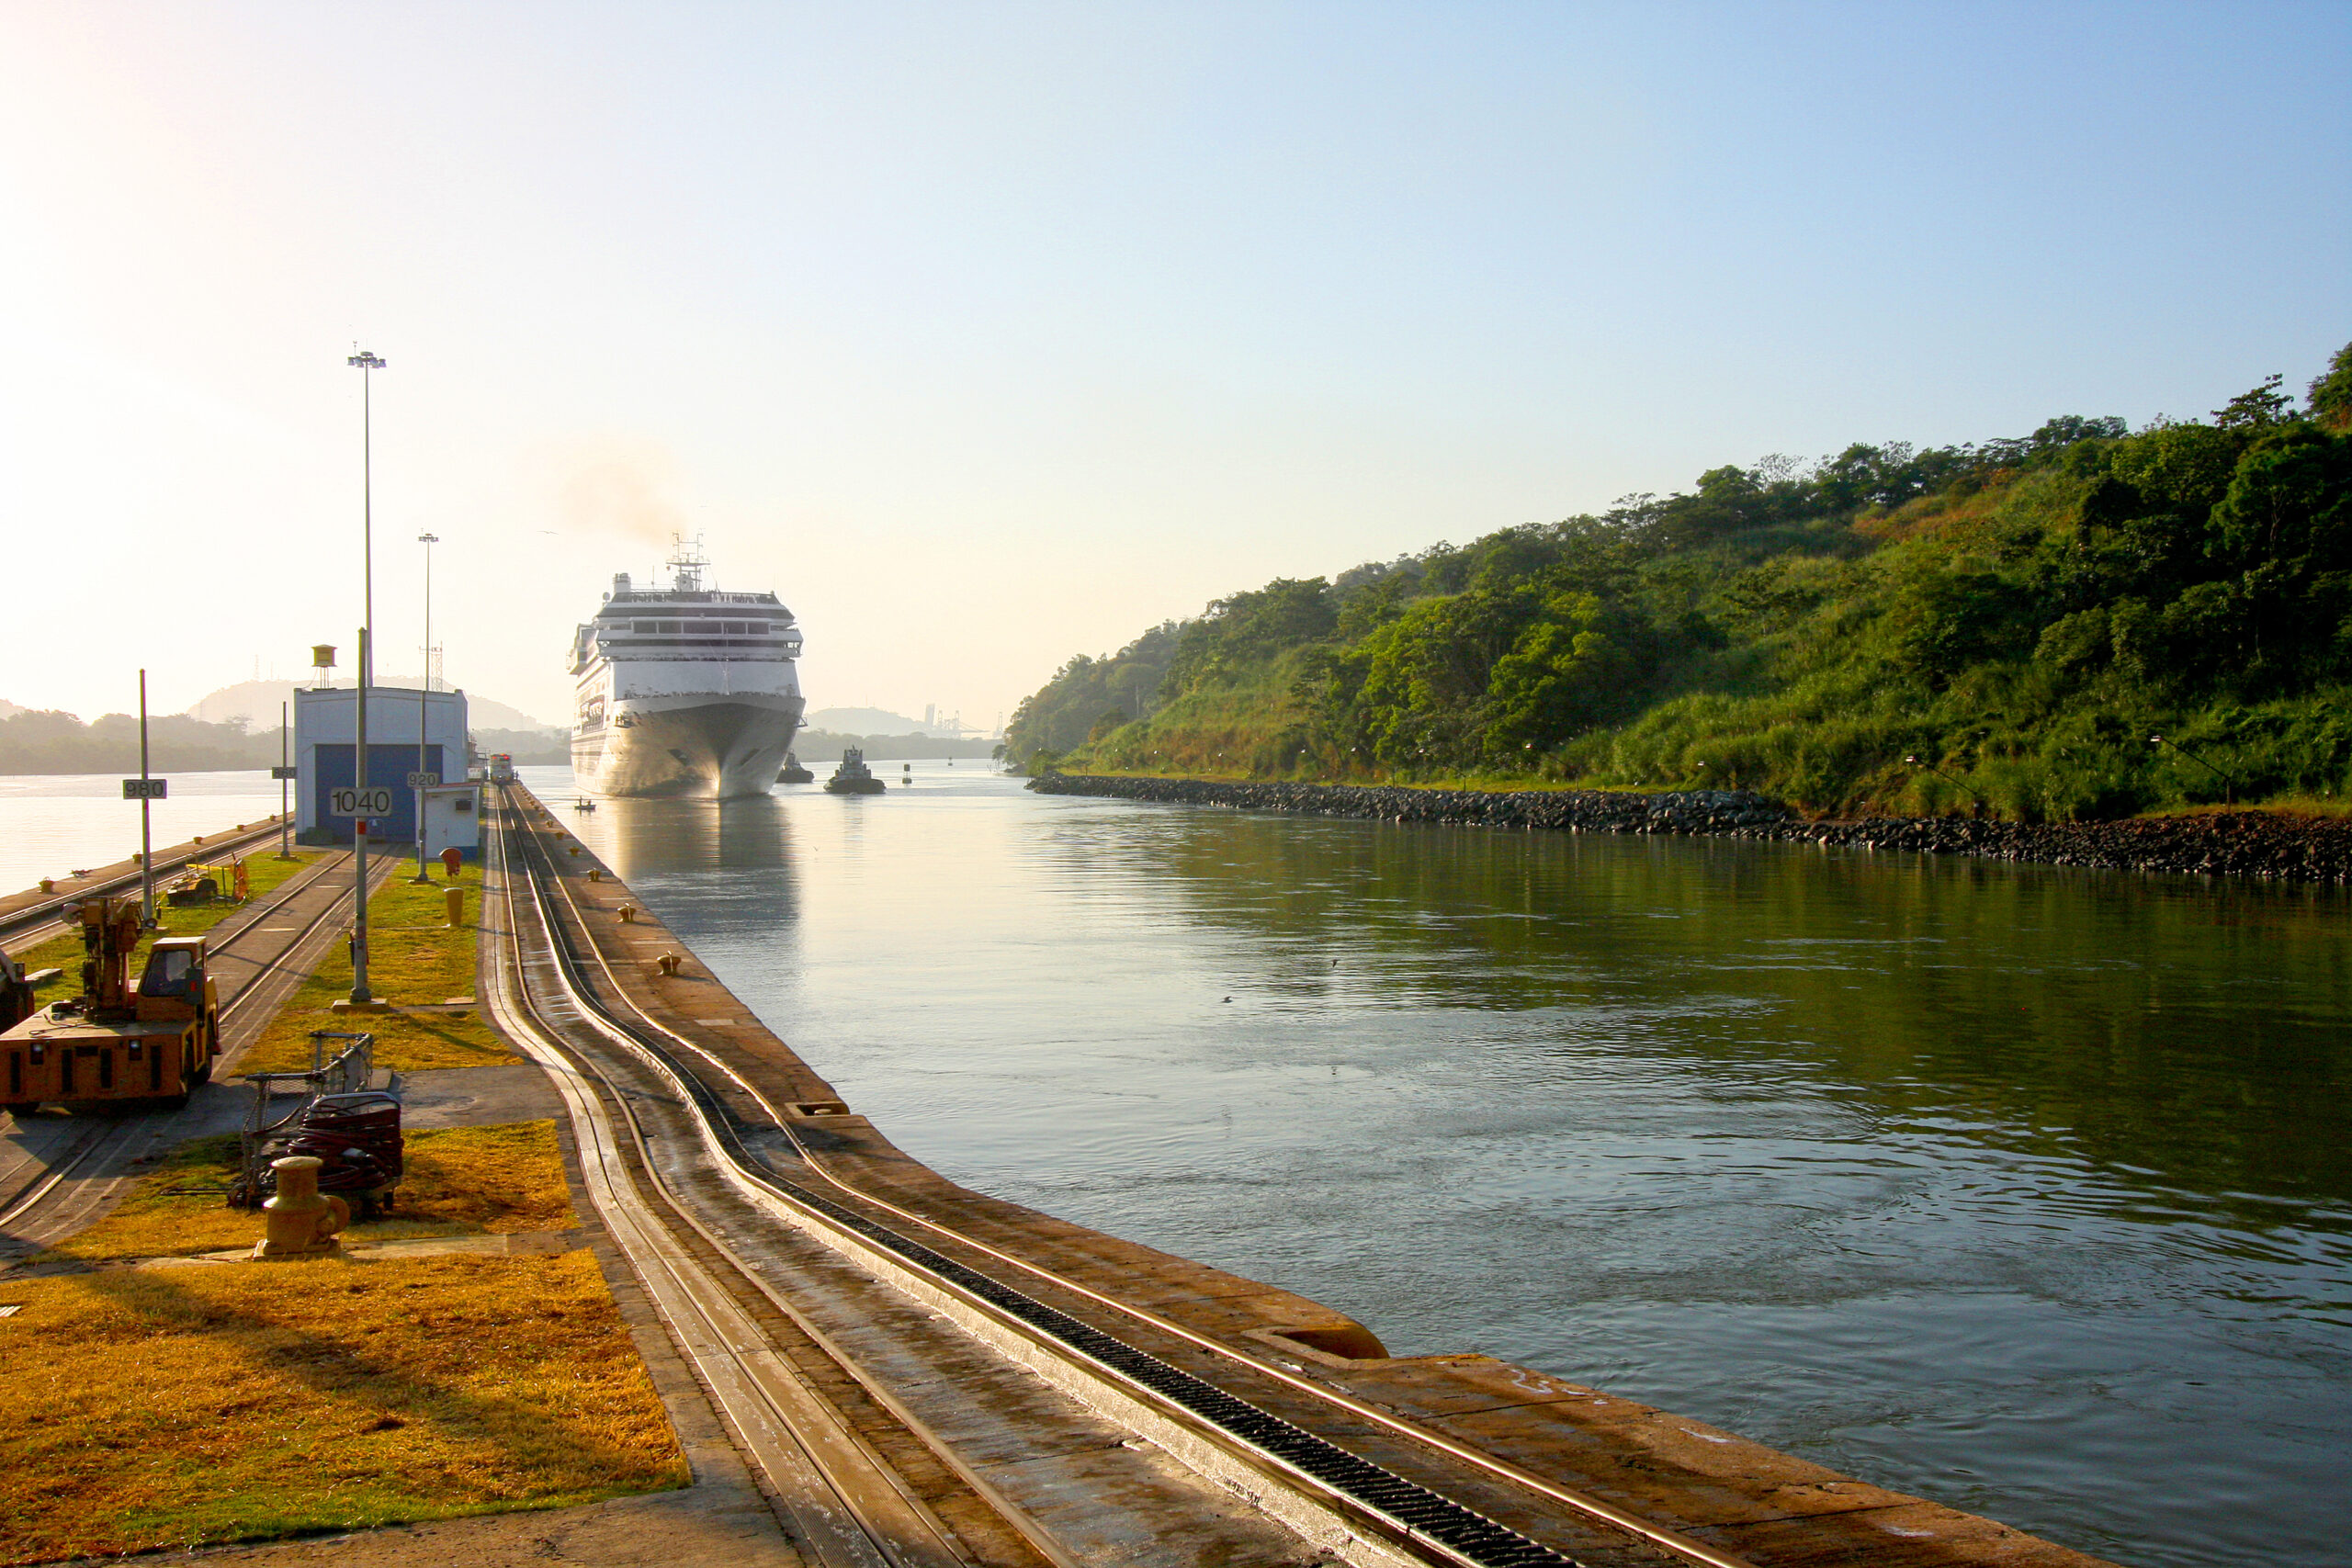 Cruise ship enters the Miraflores lock in the Panama Canal